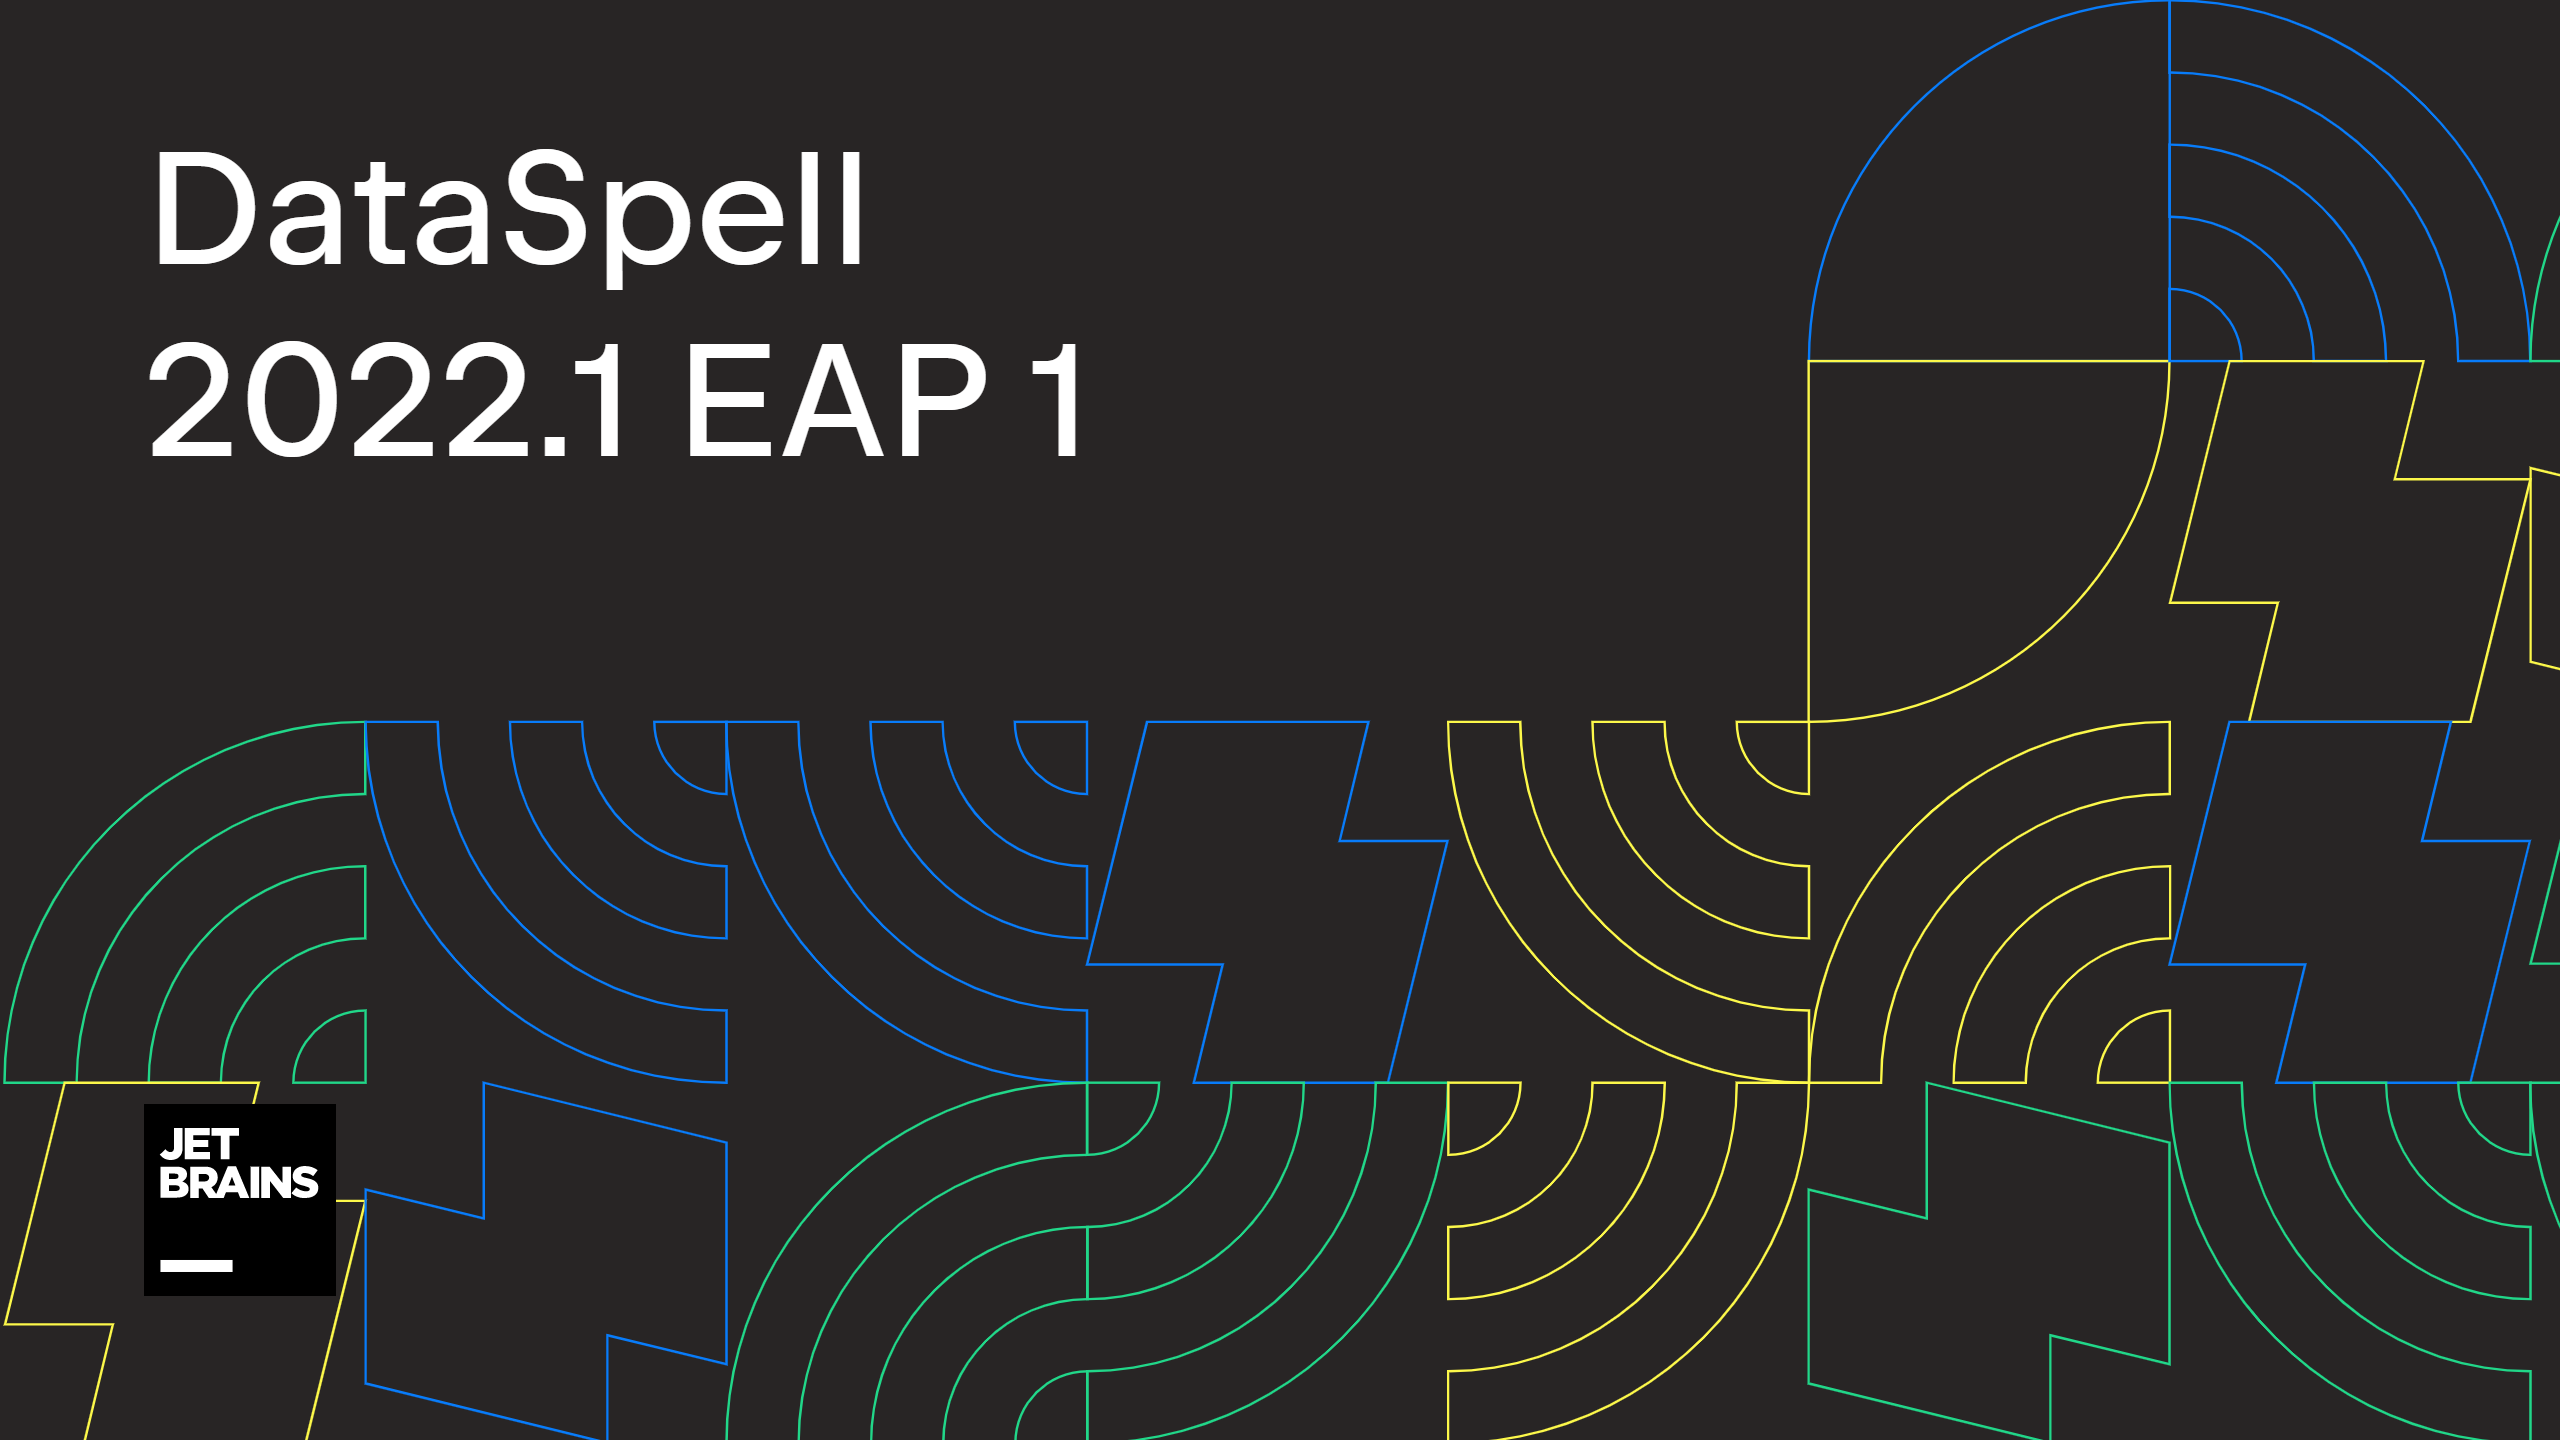 DataSpell 2022.1 EAP 1 Is Out!